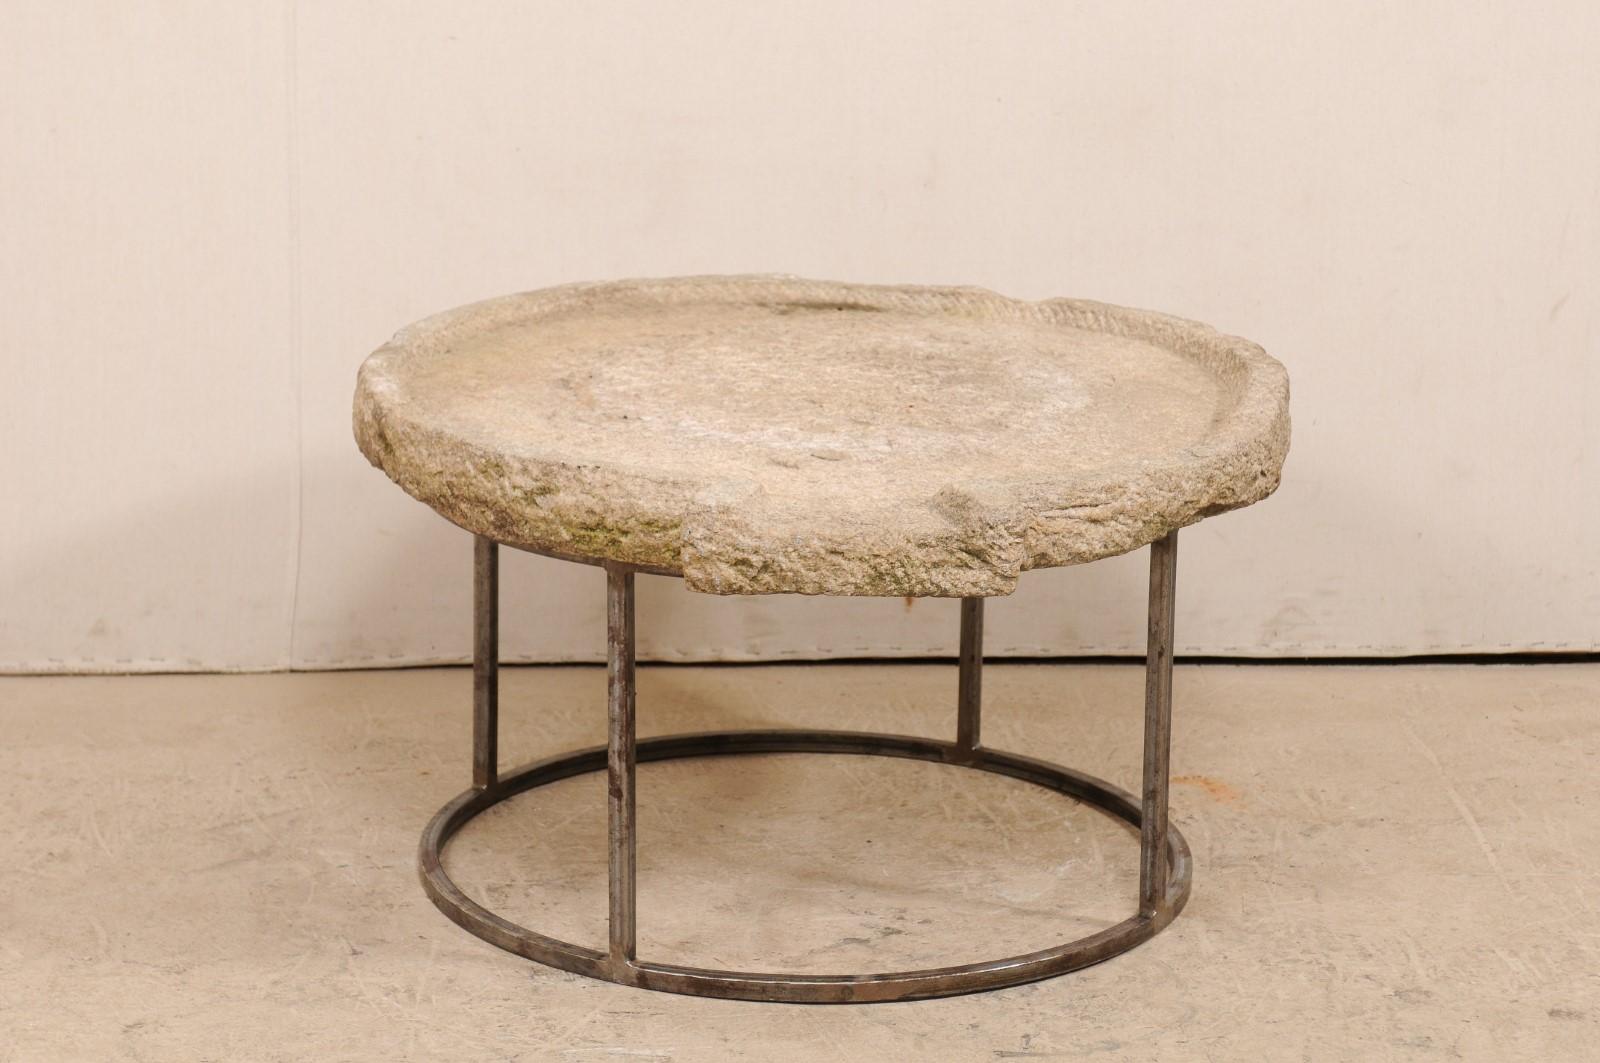 A 19th century Mediterranean stone trough table on custom base. This unique coffee table has been fashioned from a 19th century stone trough, once used in the production to press olives into oil. The round-shaped stone has been carved of hand and